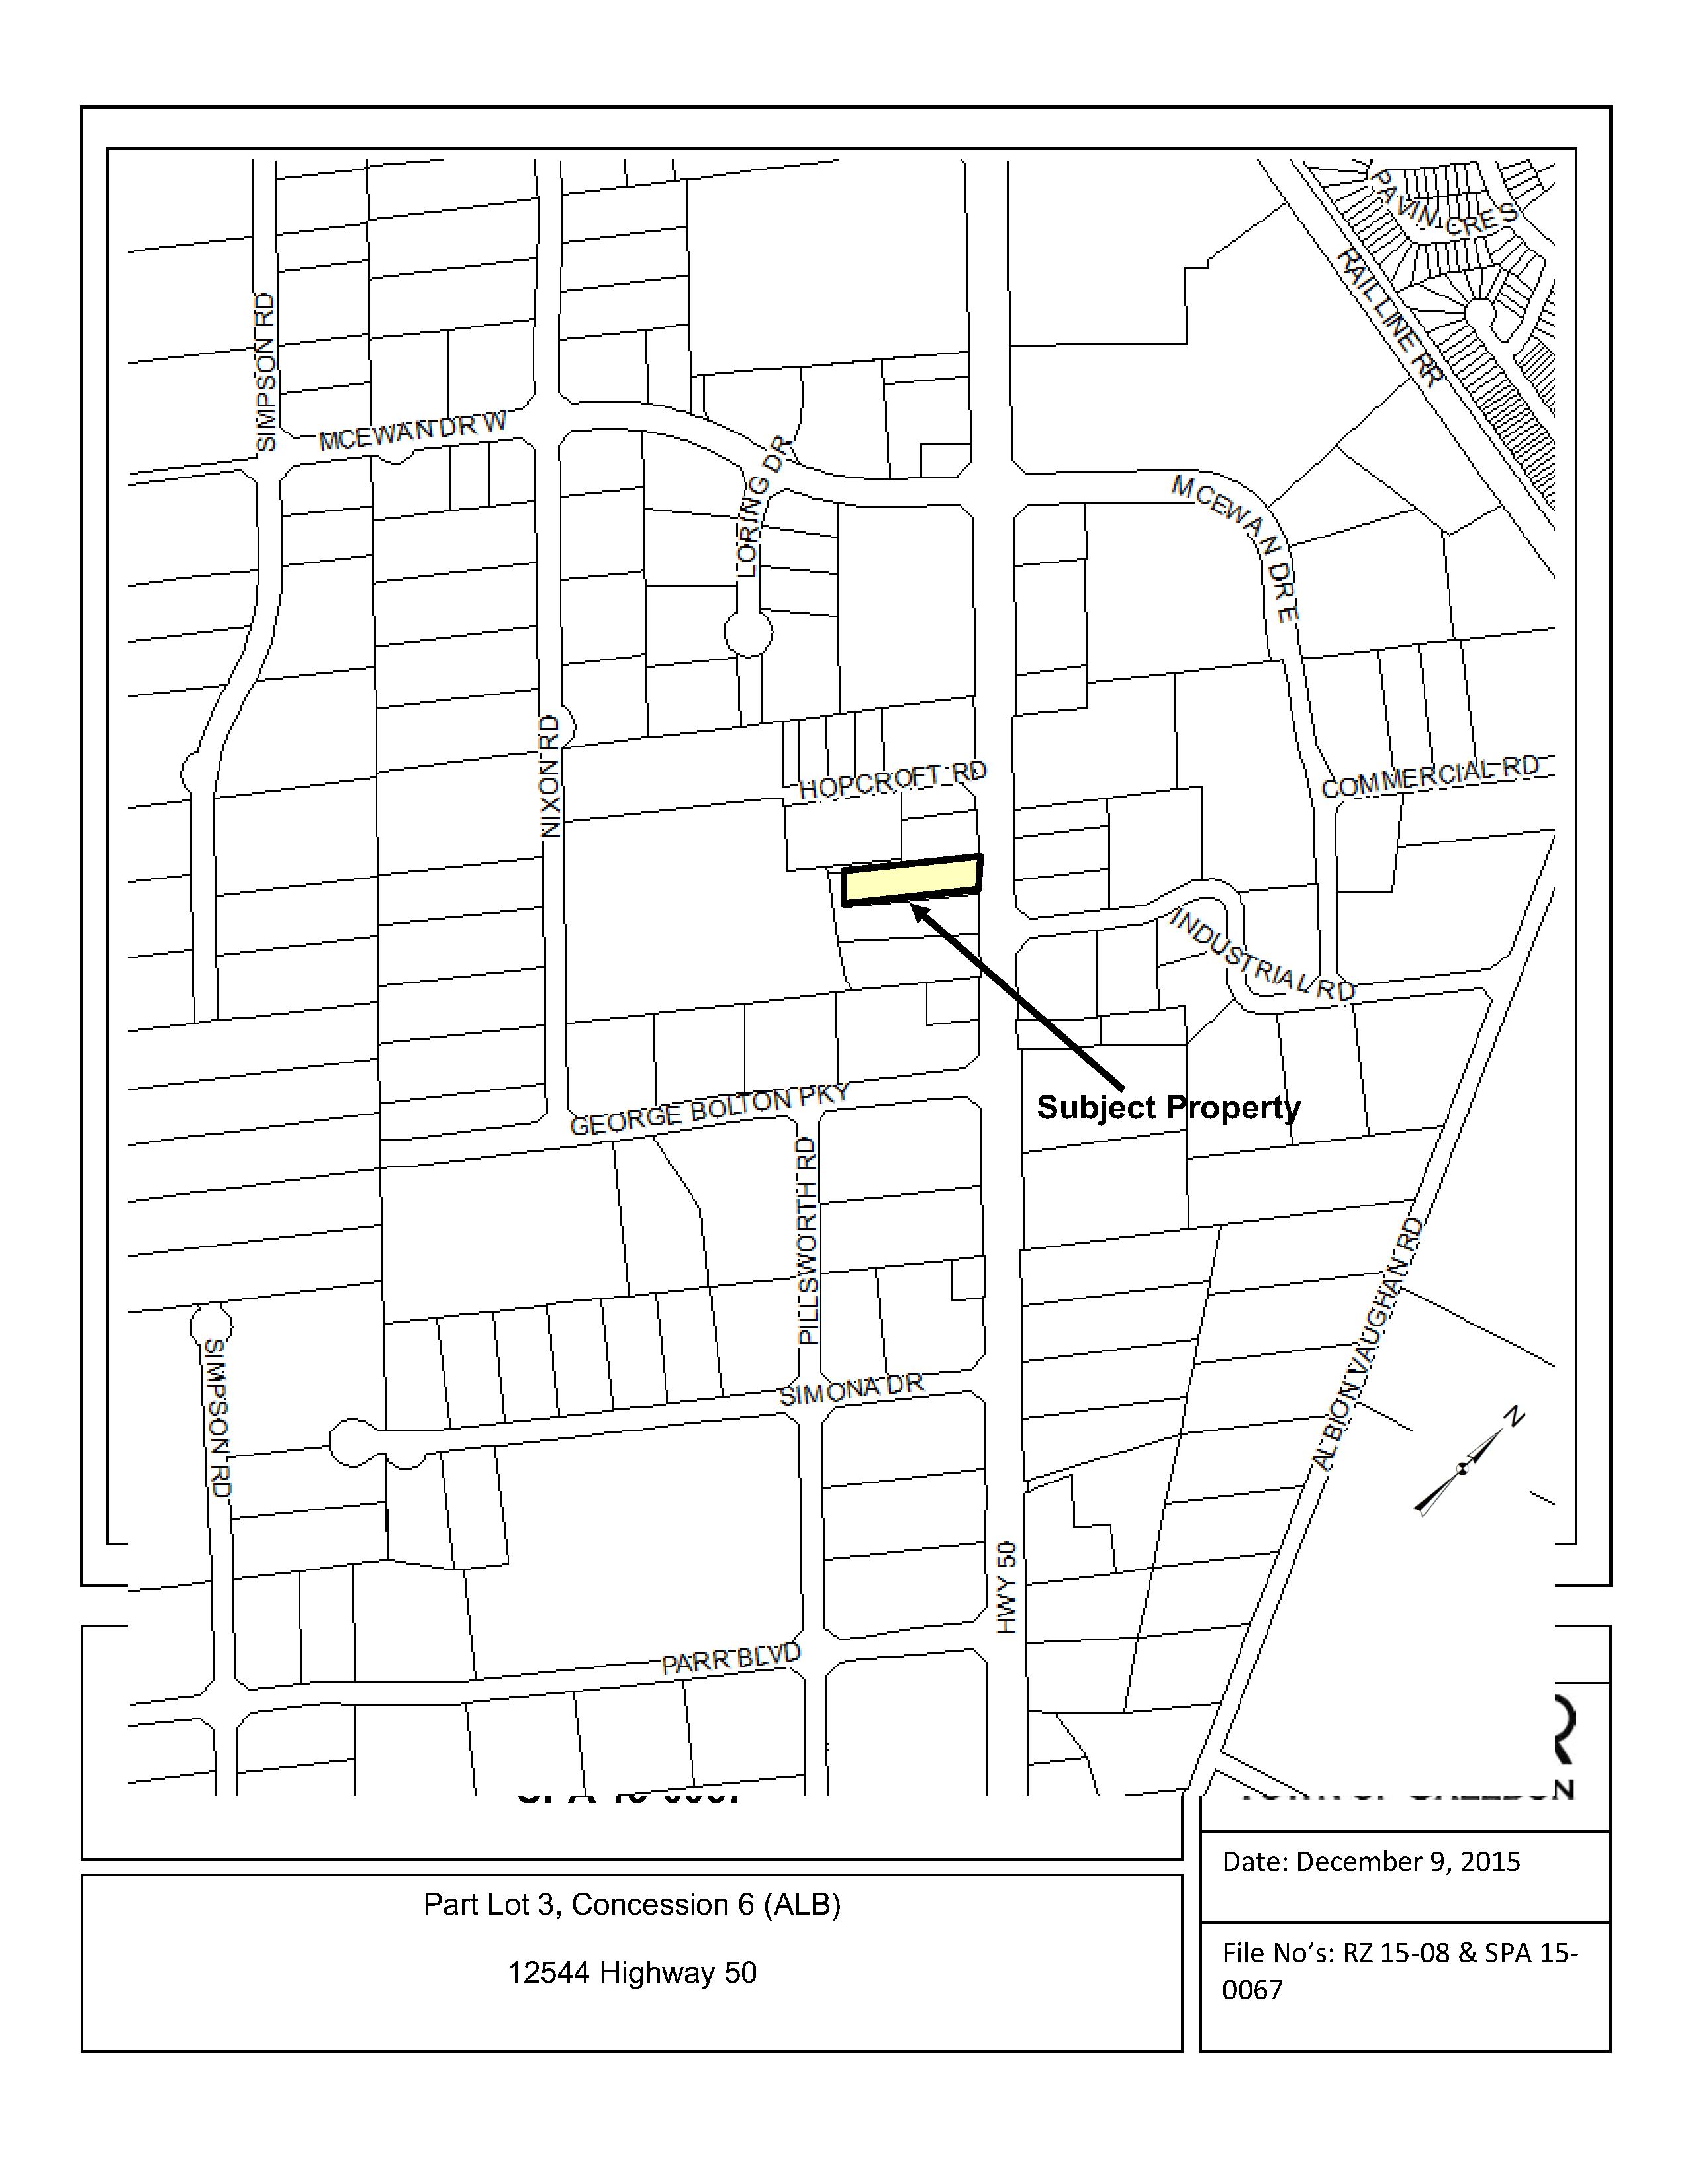 Map of Subject Property at 12544 Highway 50